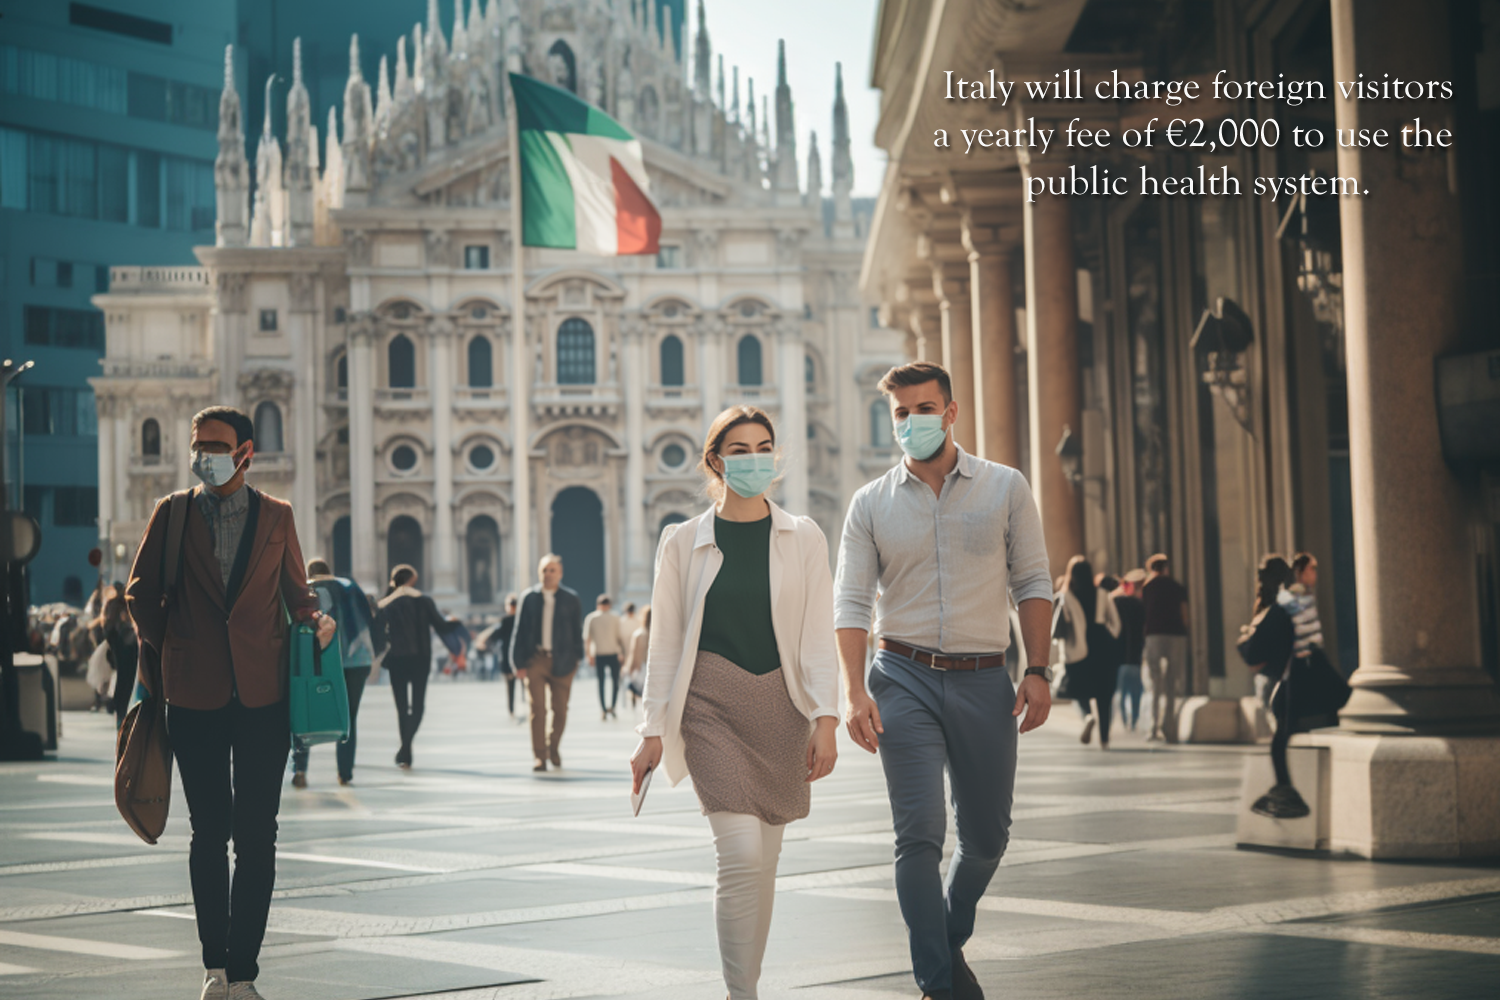 Italy will charge foreign visitors a yearly fee of €2,000 to use the public health system.